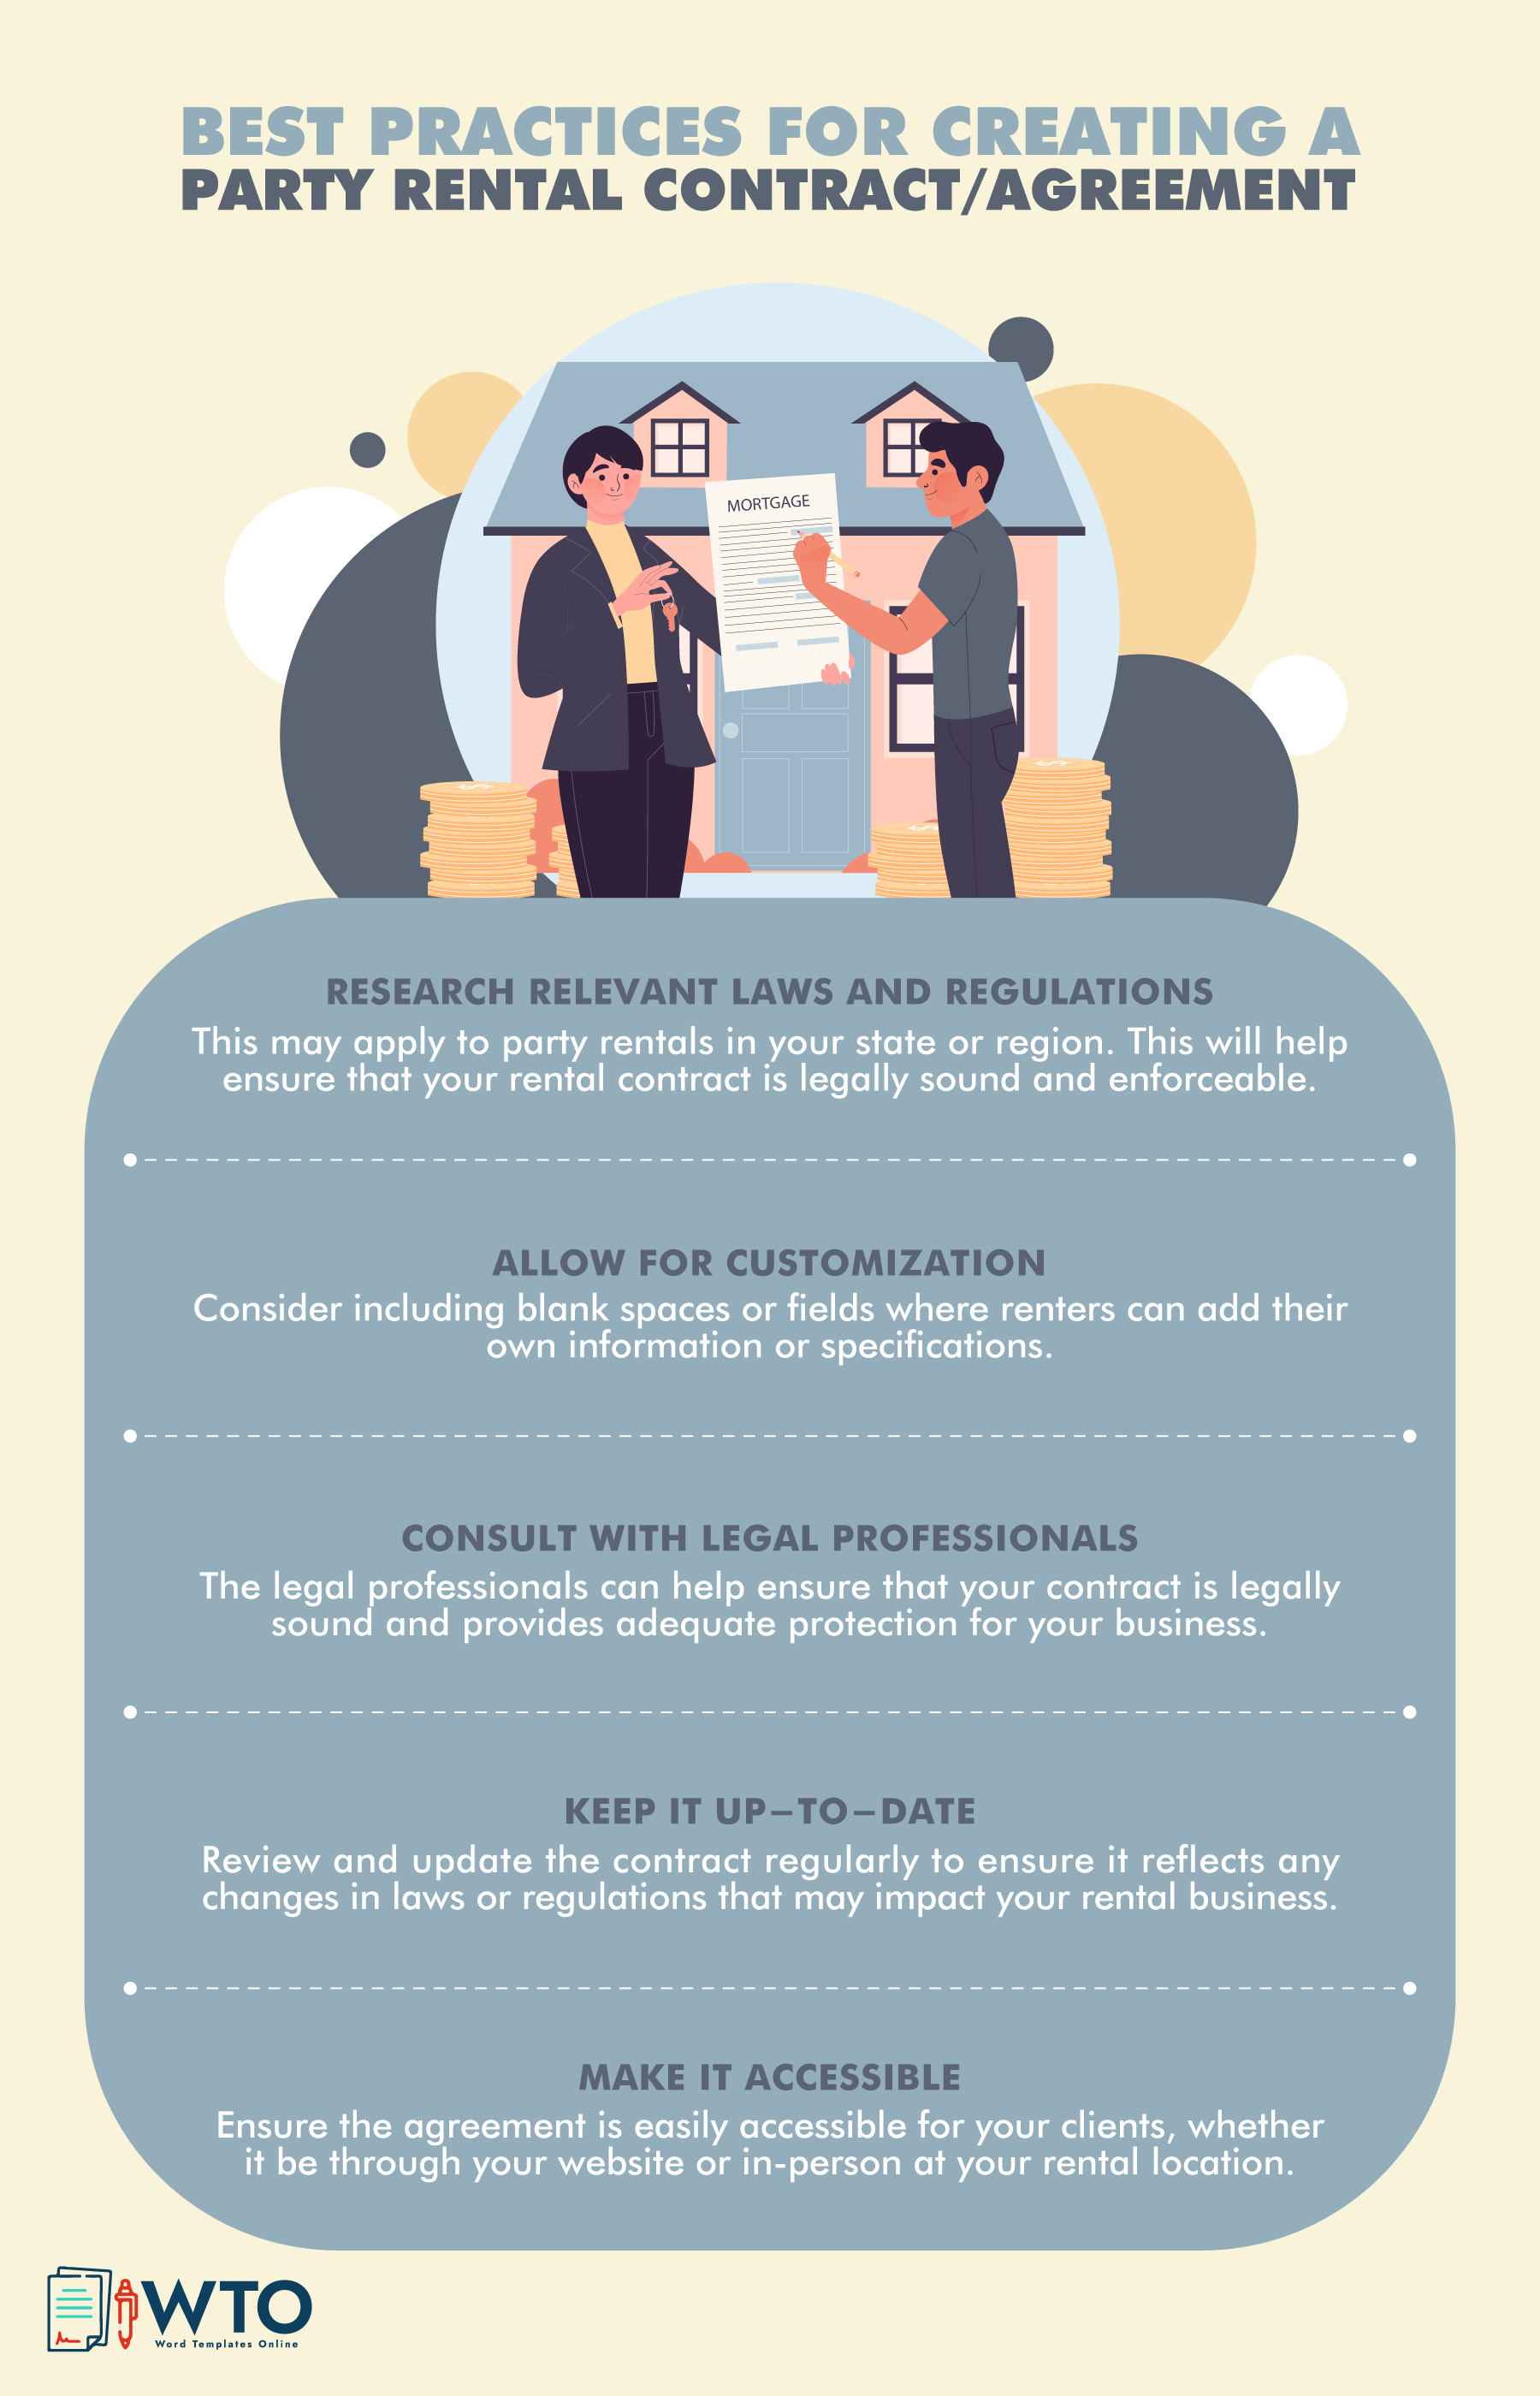 This infographic is about the best practices to create party rental agreement.